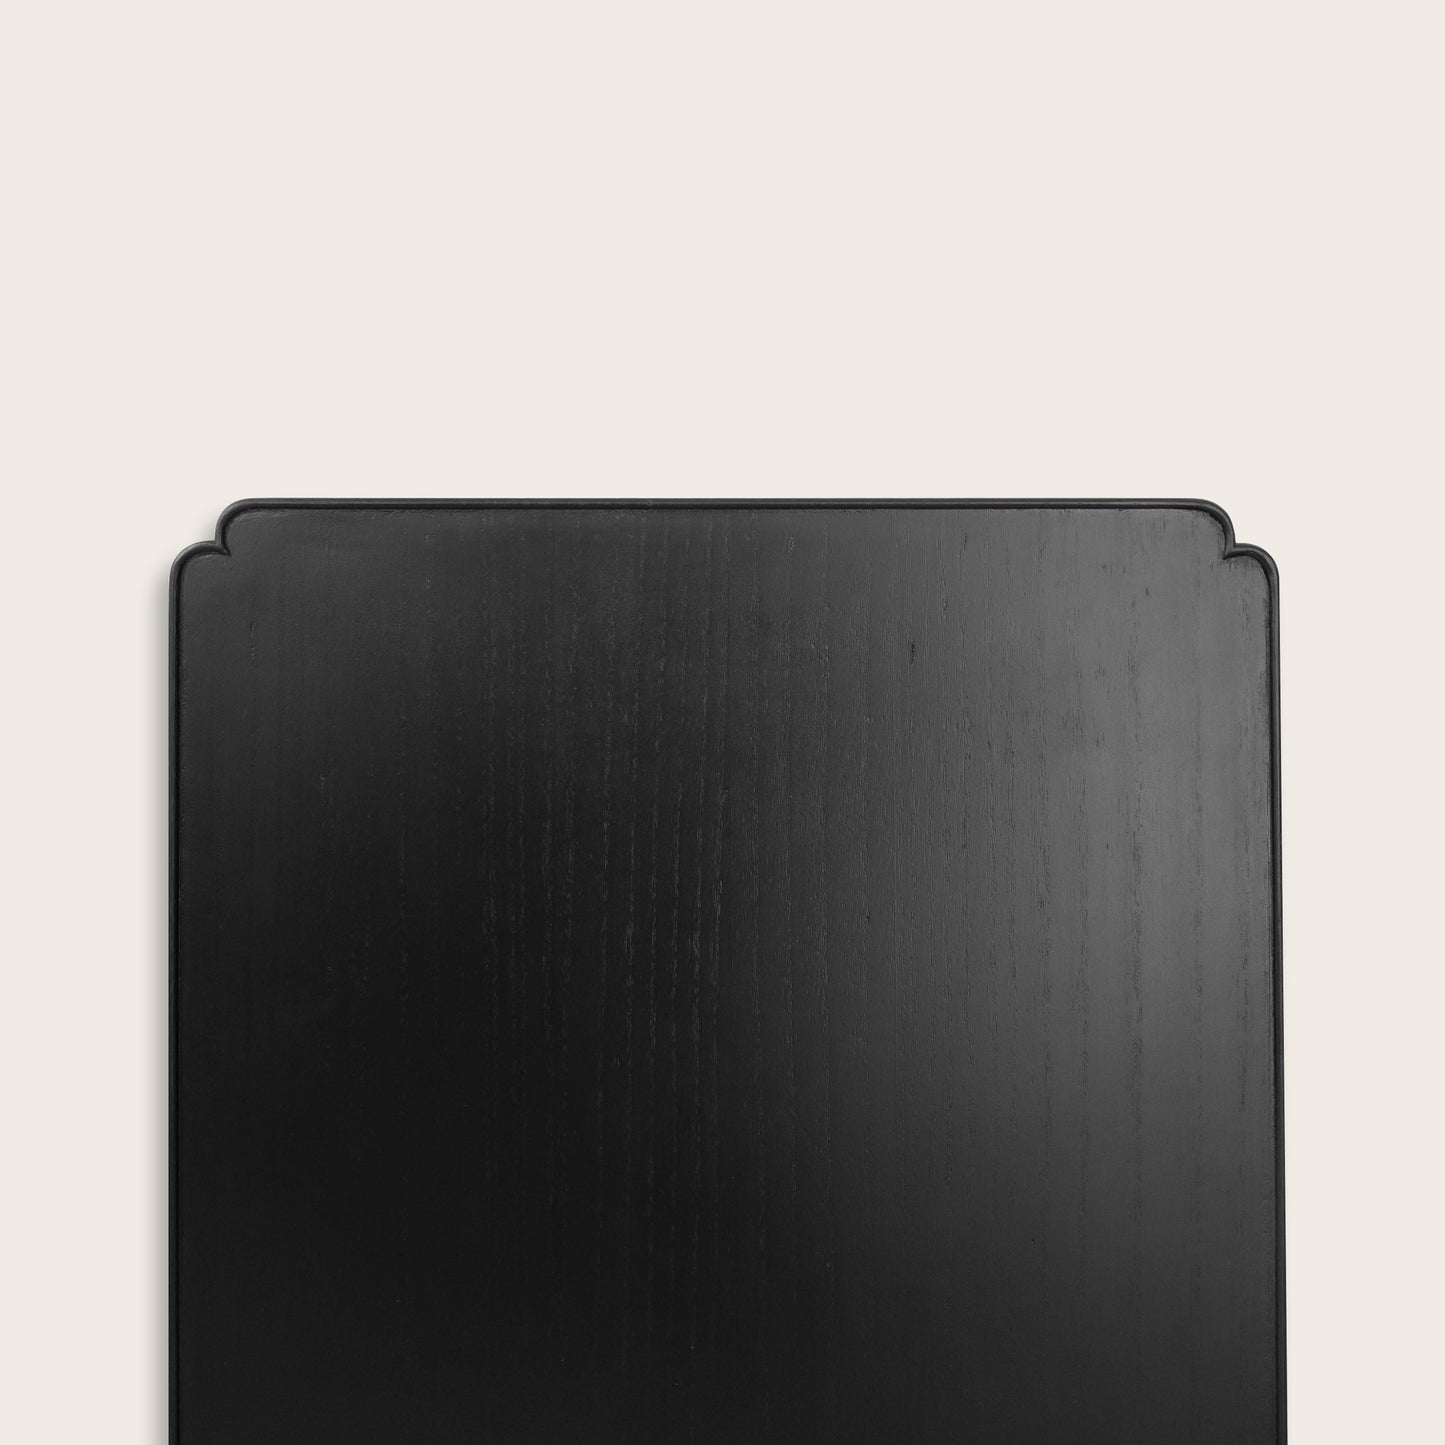 Wooden tray in black with rounded corners